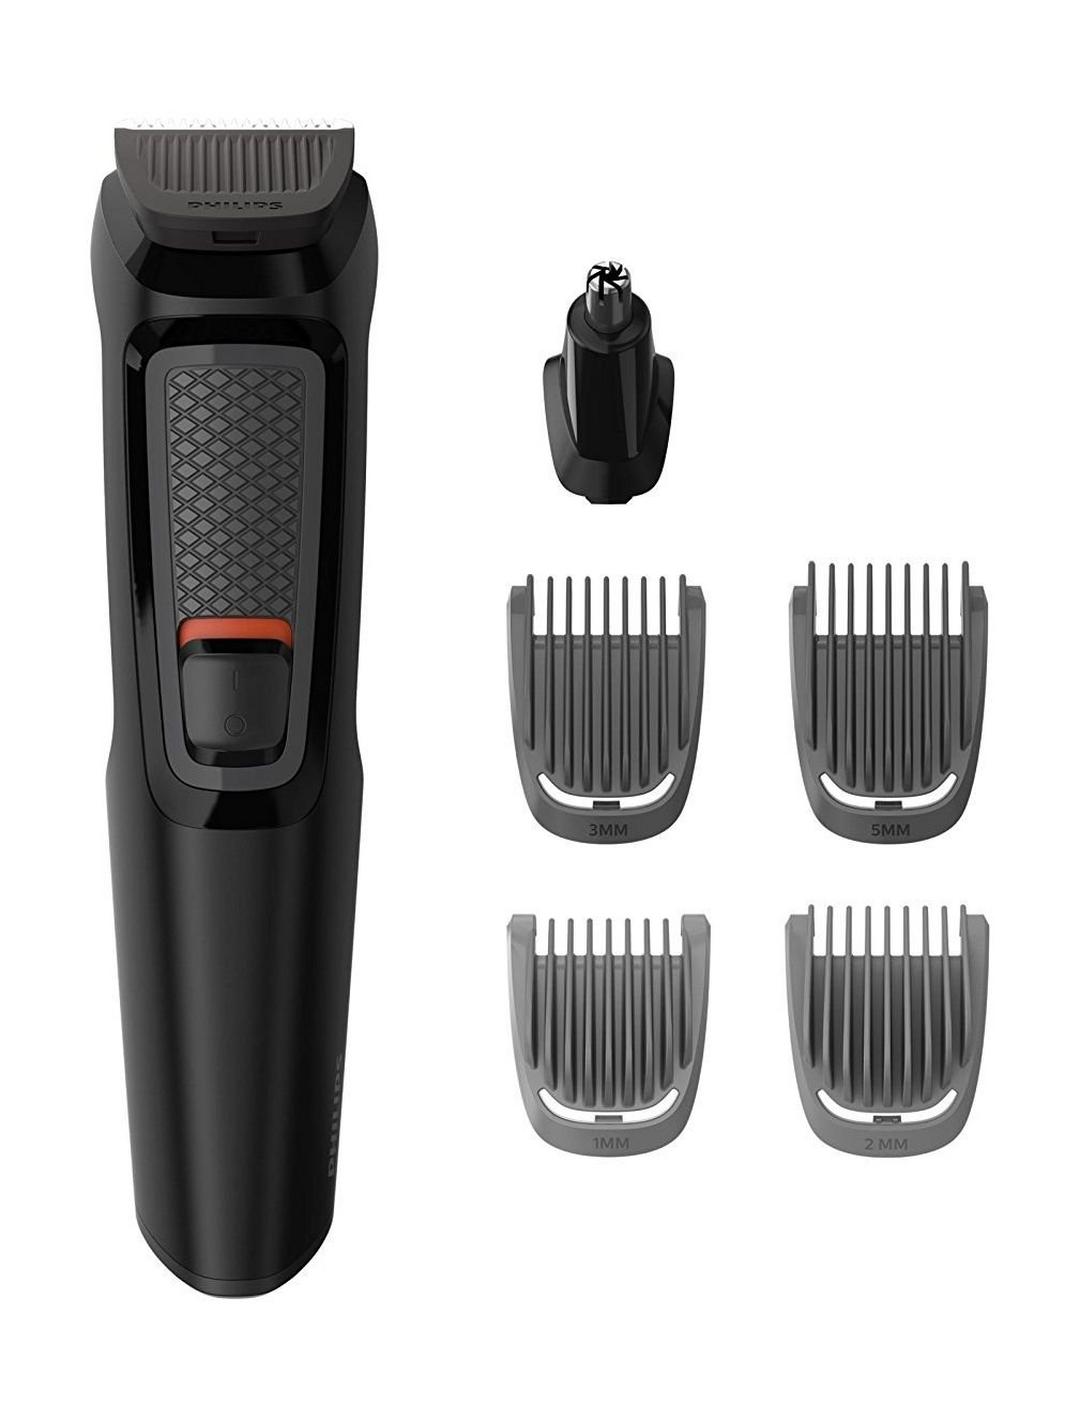 Philips 6 in 1 Male Trimmer (MG3710/13) - Black